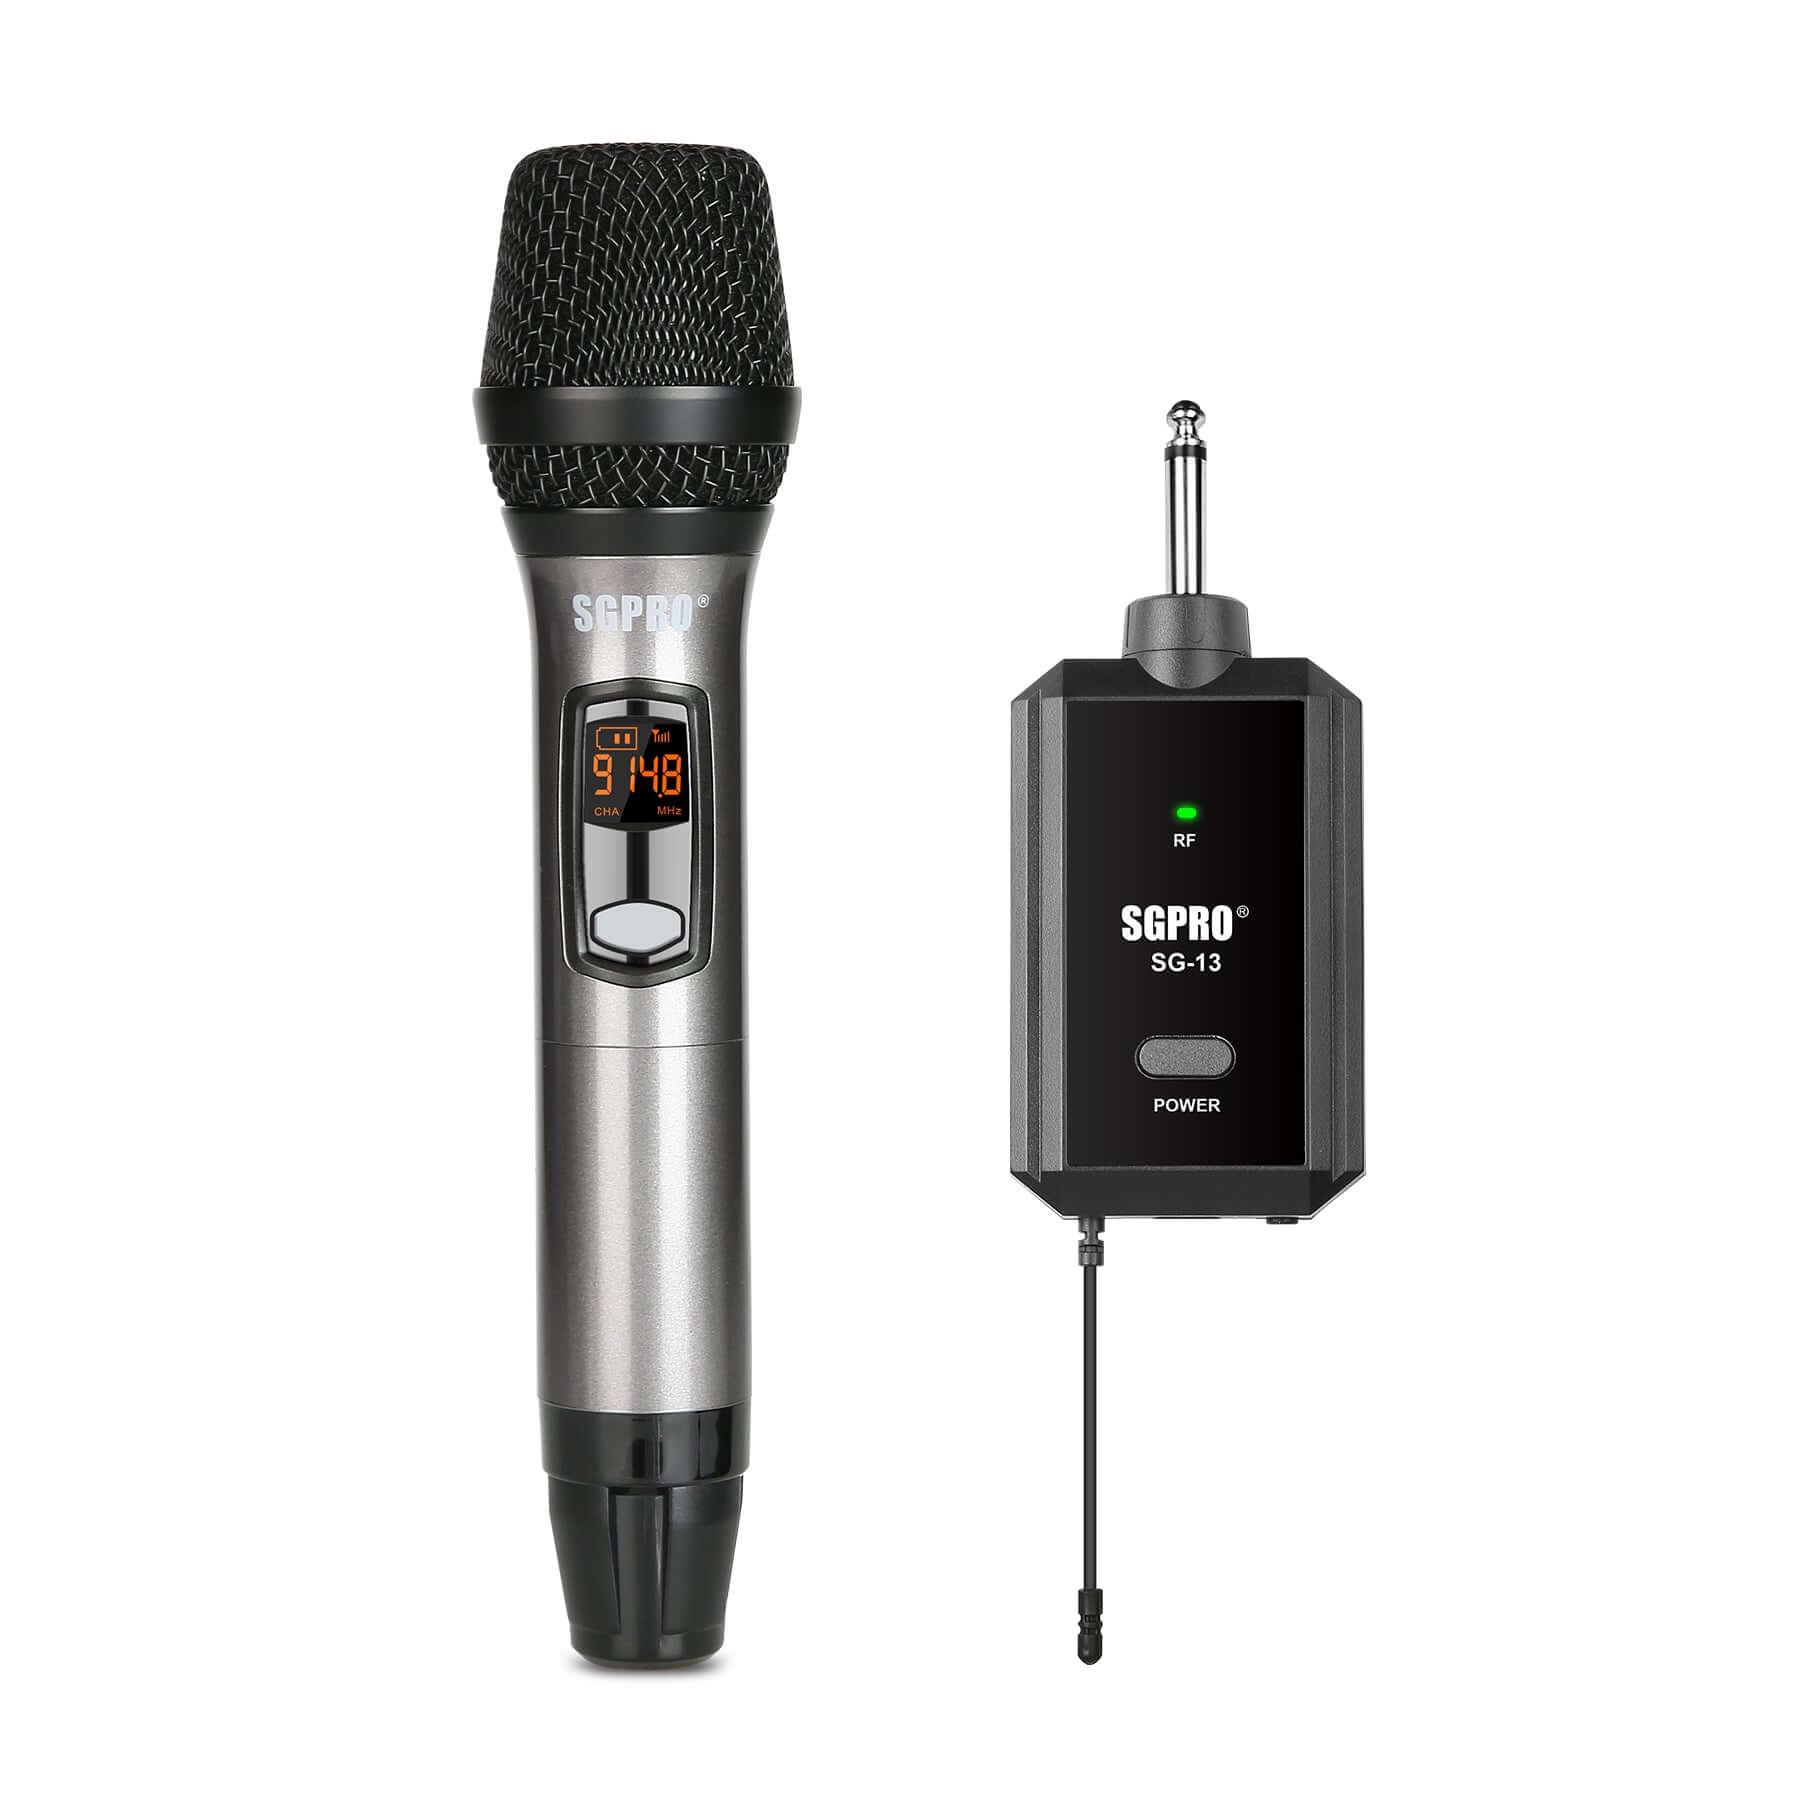 Receiver　SG-13　and　Rechargeable　Handheld　Single　SGPRO　Mic